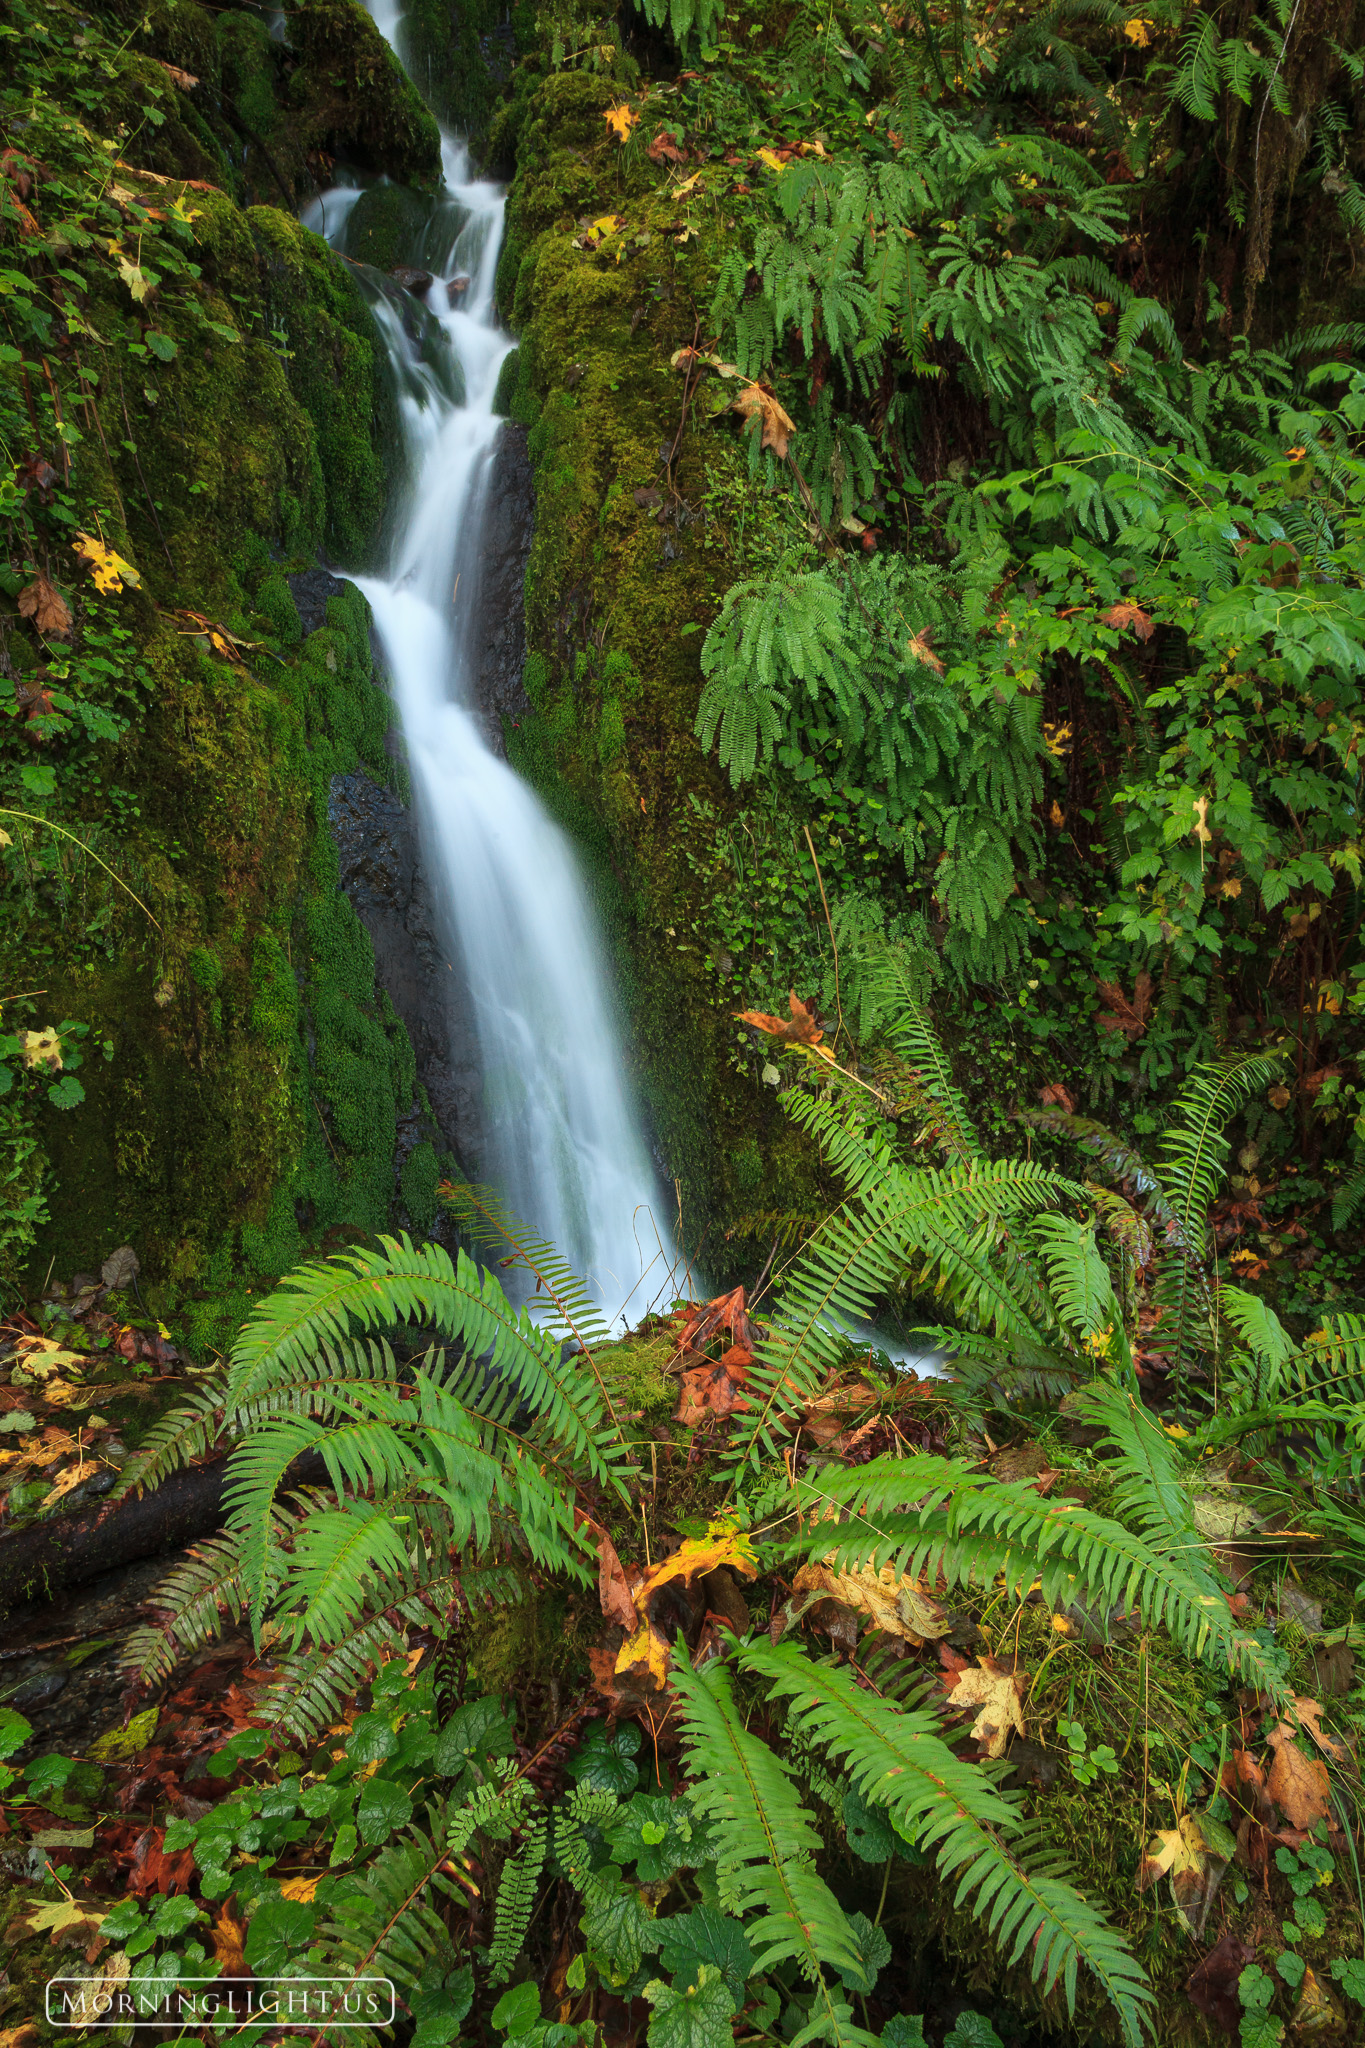 Not far from Lake Quinault a small stream tumbles down through moss and ferns on its westward journey.